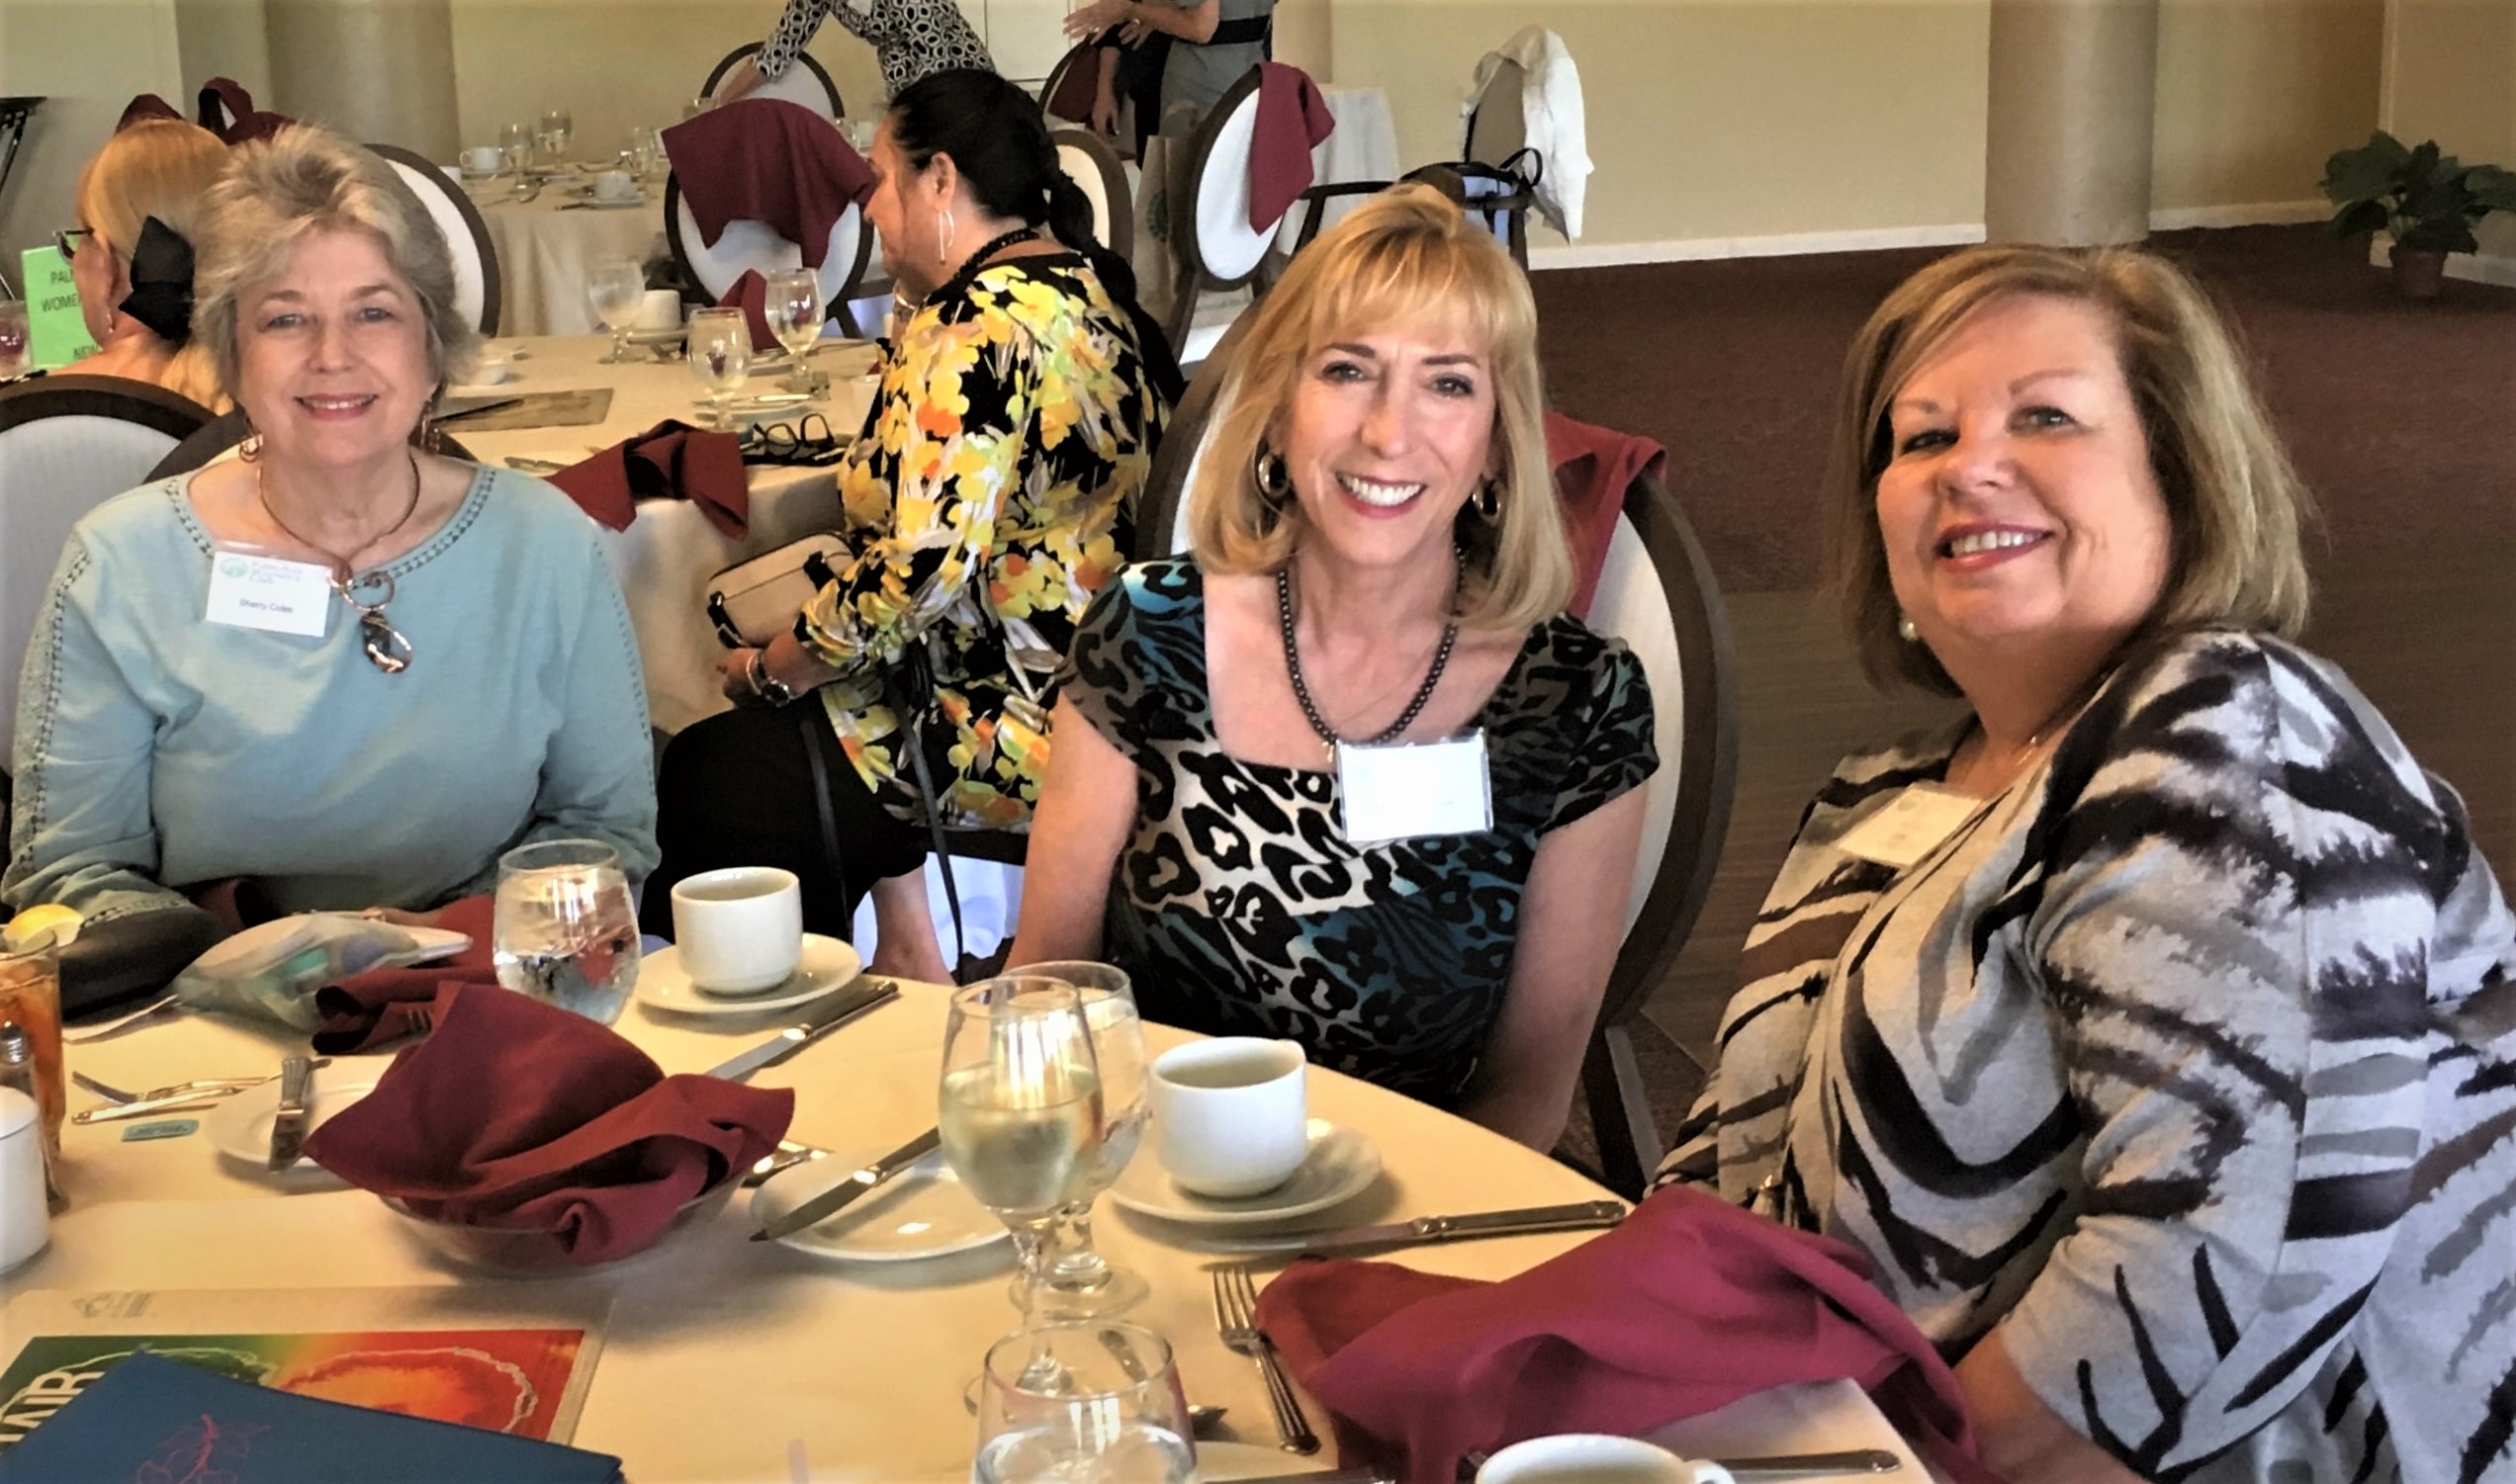 Sherry Coles, Michelle Crabtree and Karen Duncan socialize at the book sale luncheon.